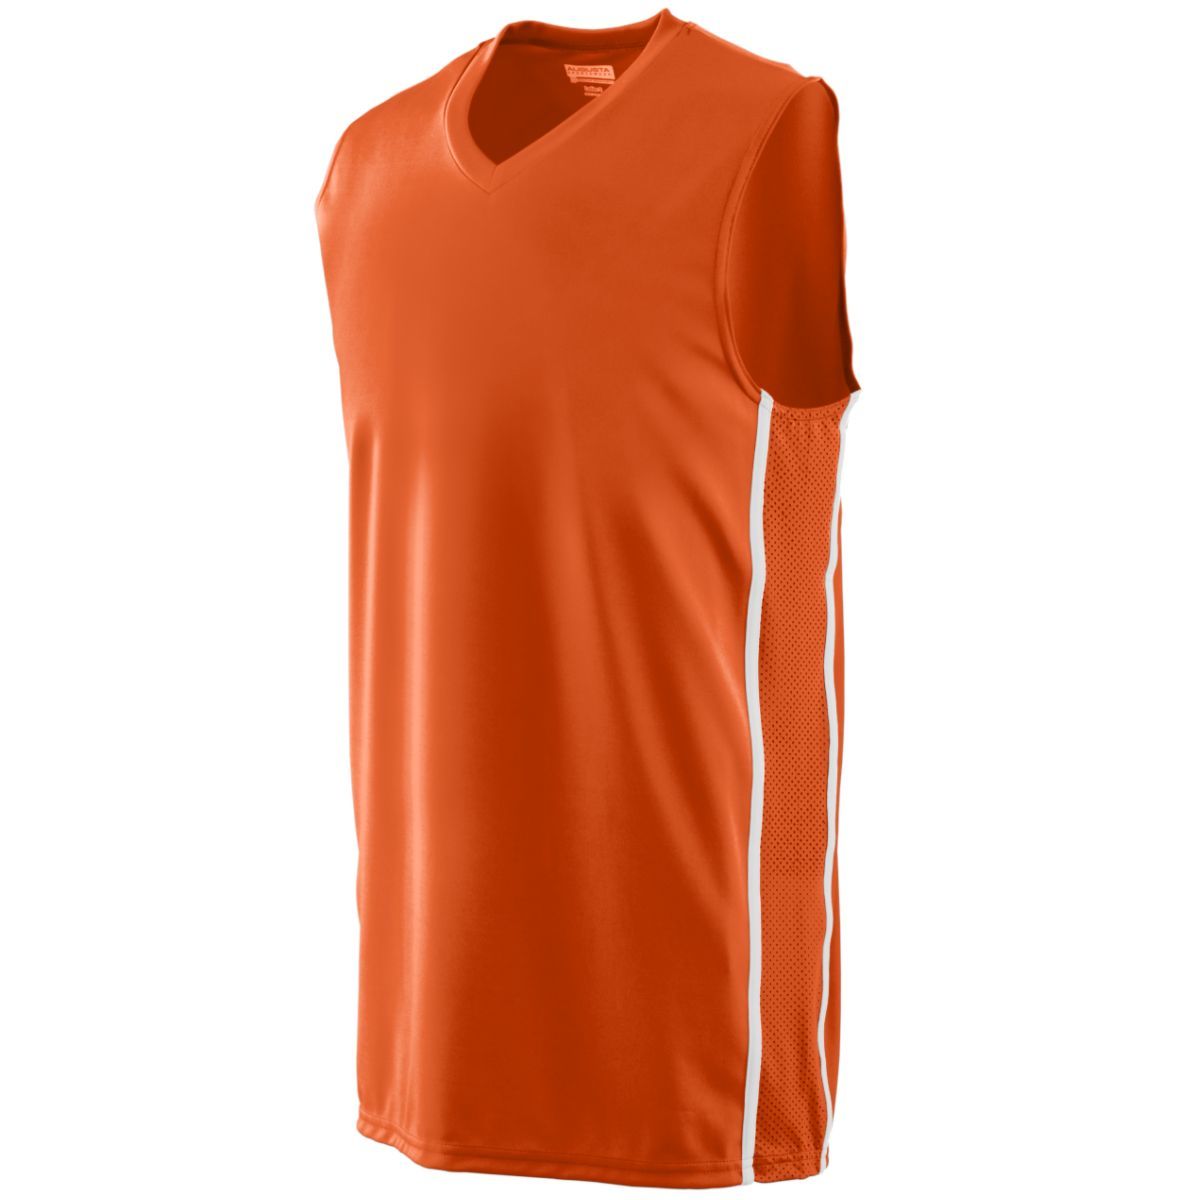 Augusta Sportswear Winning Streak Game Jersey in Orange/White  -Part of the Adult, Adult-Jersey, Augusta-Products, Basketball, Shirts, All-Sports, All-Sports-1 product lines at KanaleyCreations.com